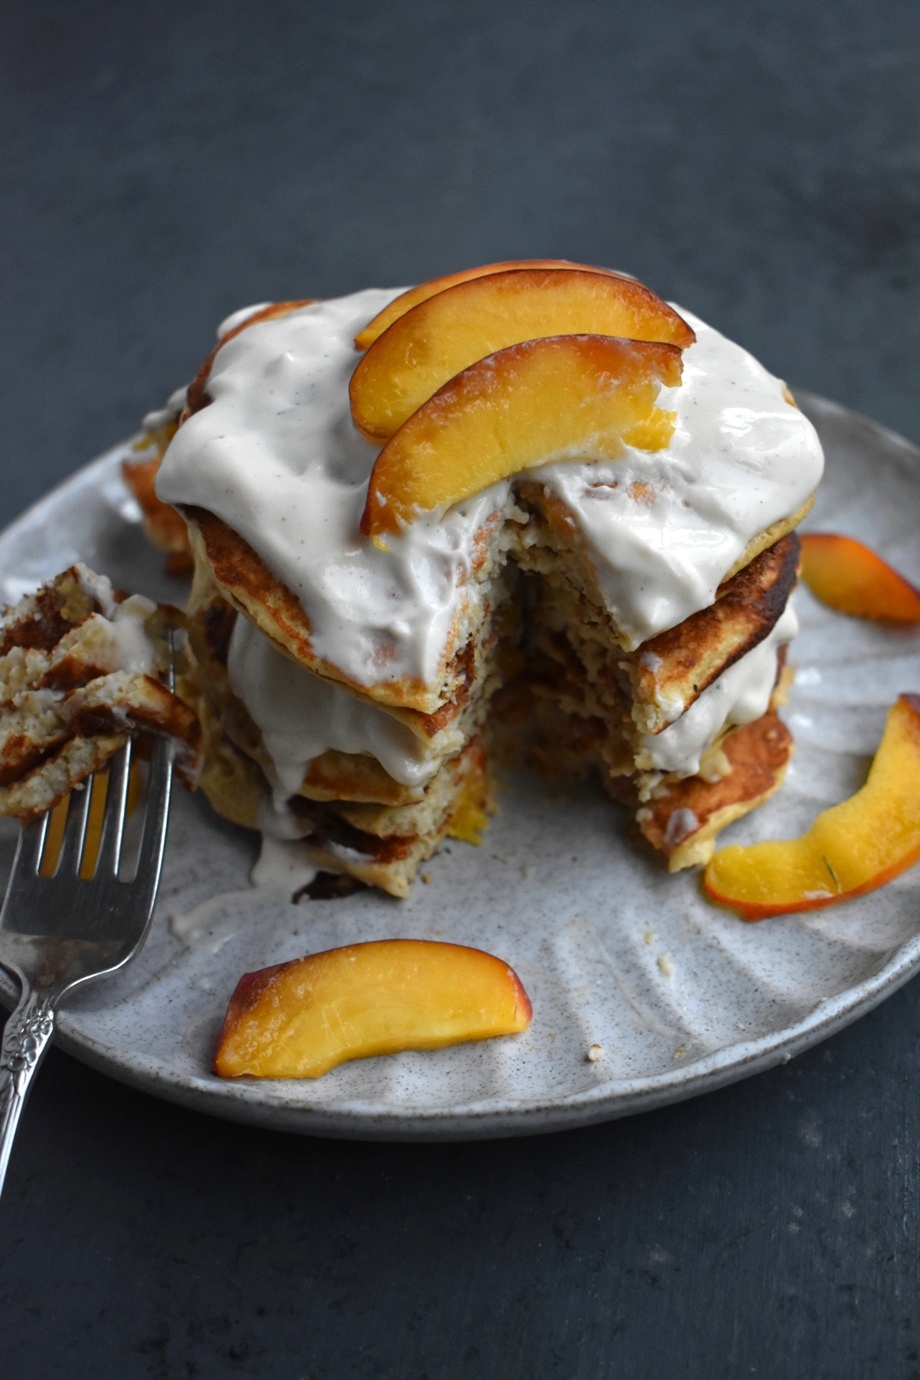 Whole-Grain Peaches and Cream Pancakes are dairy-free, whole-grain and full of delicious juicy peaches and cream. They make the perfect breakfast and a great for meal prep! www.nutritionistreviews.com